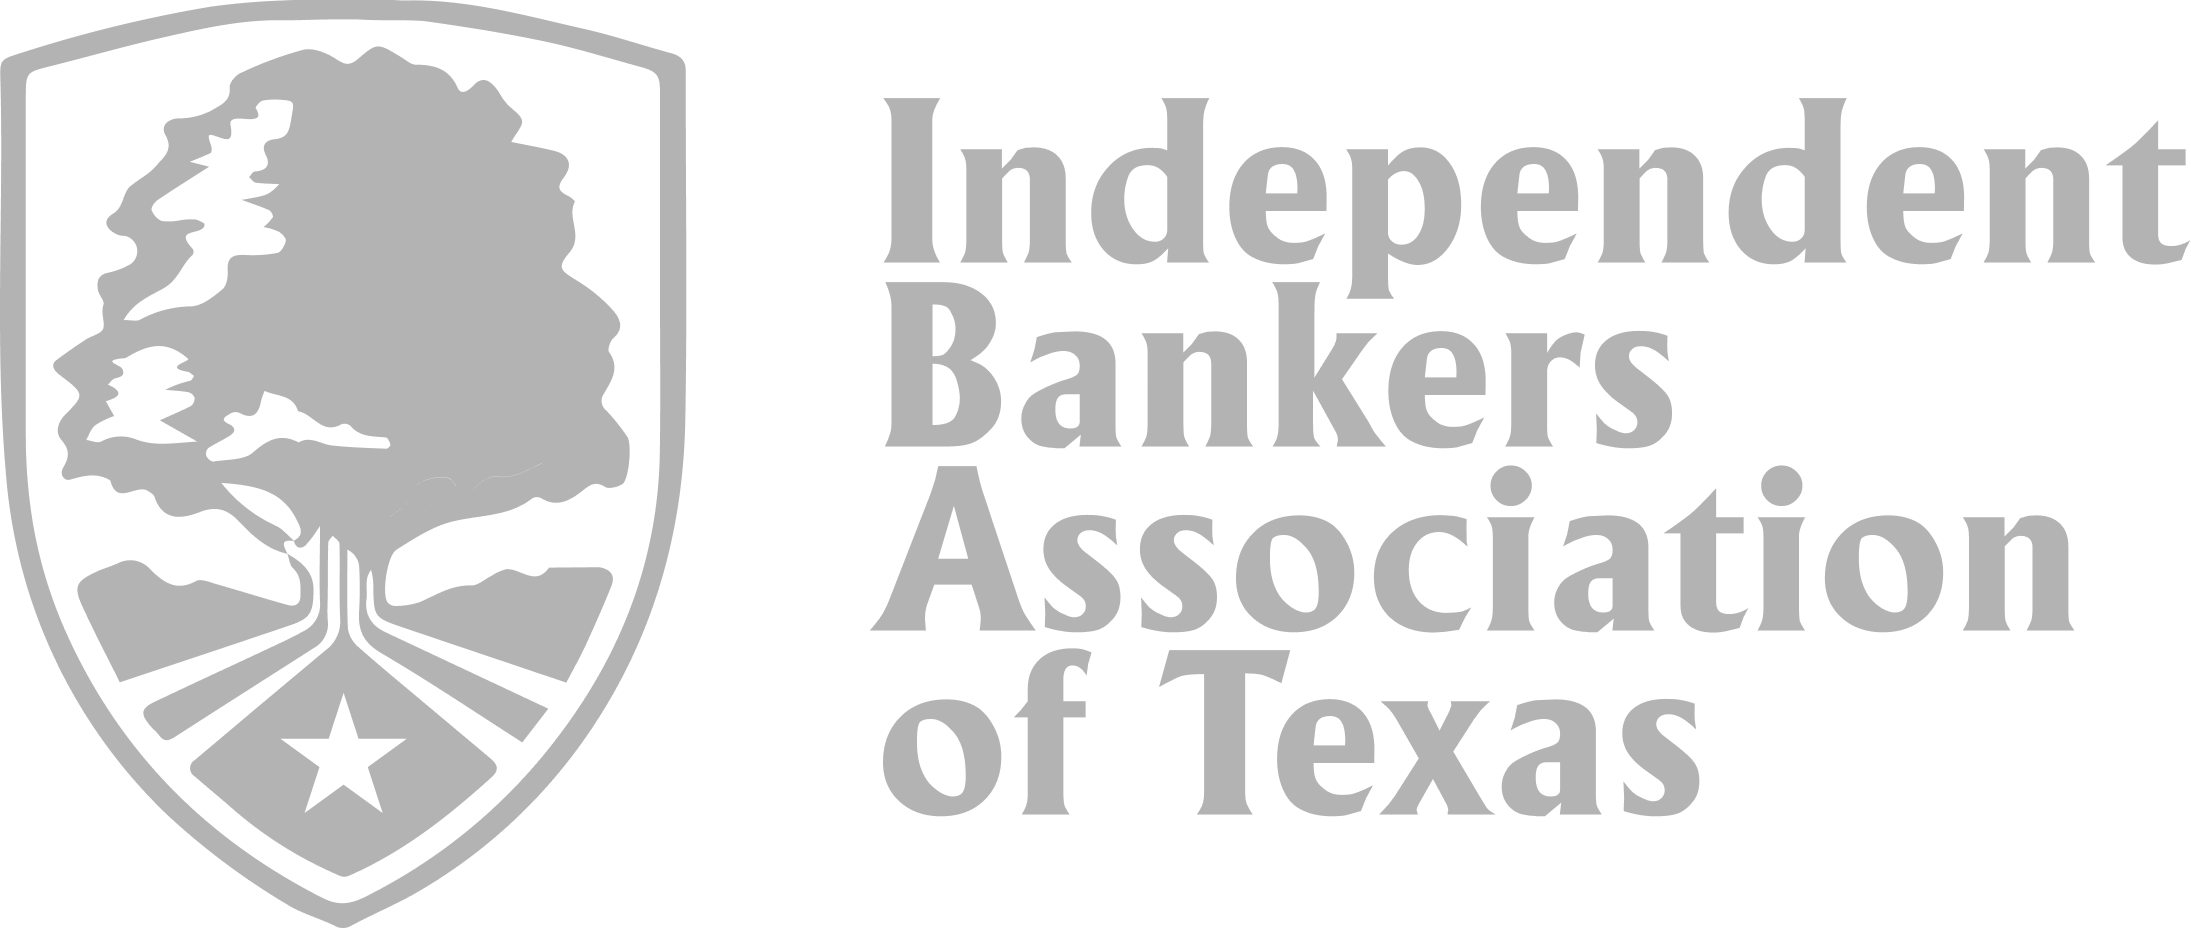 independent bankers association of texas